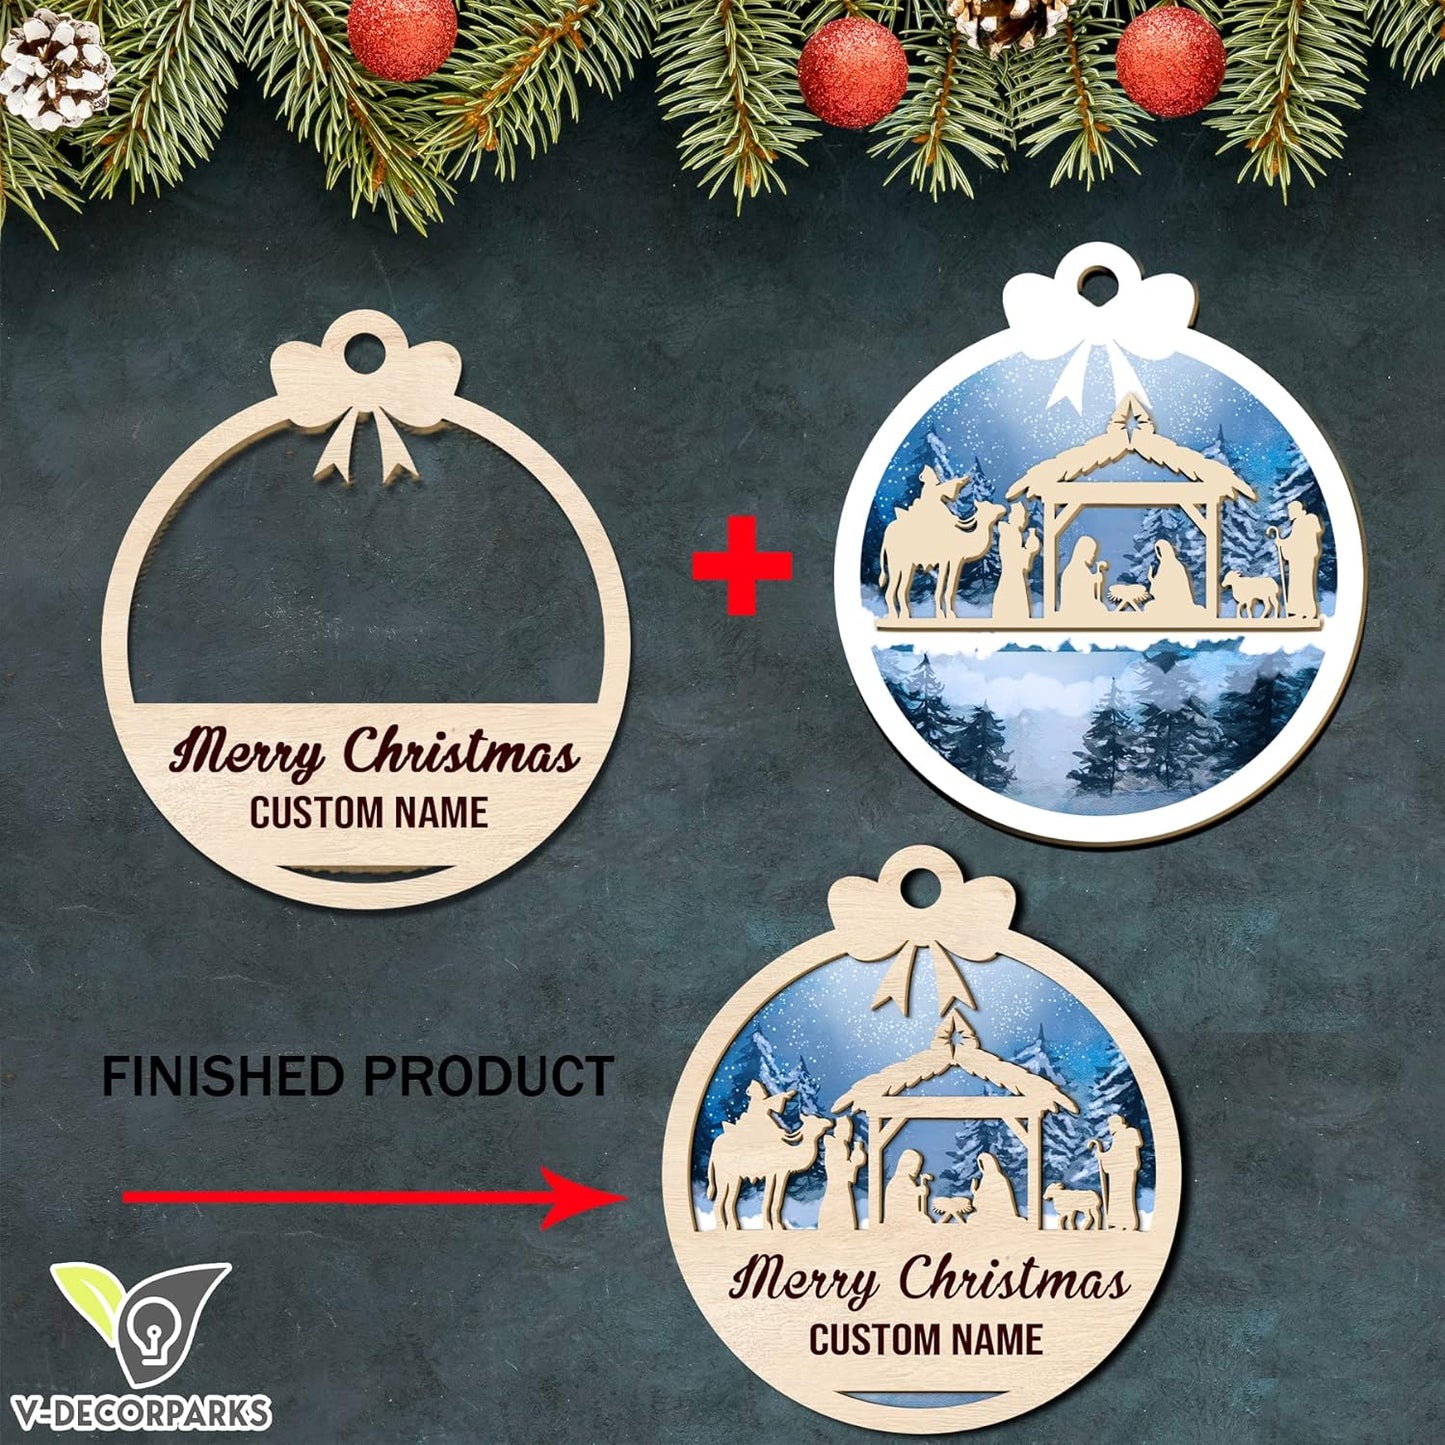 Custom Nativity Scene Christmas Wood Layered Ornaments - Personalized Ornaments for Christmas Tree Decorations